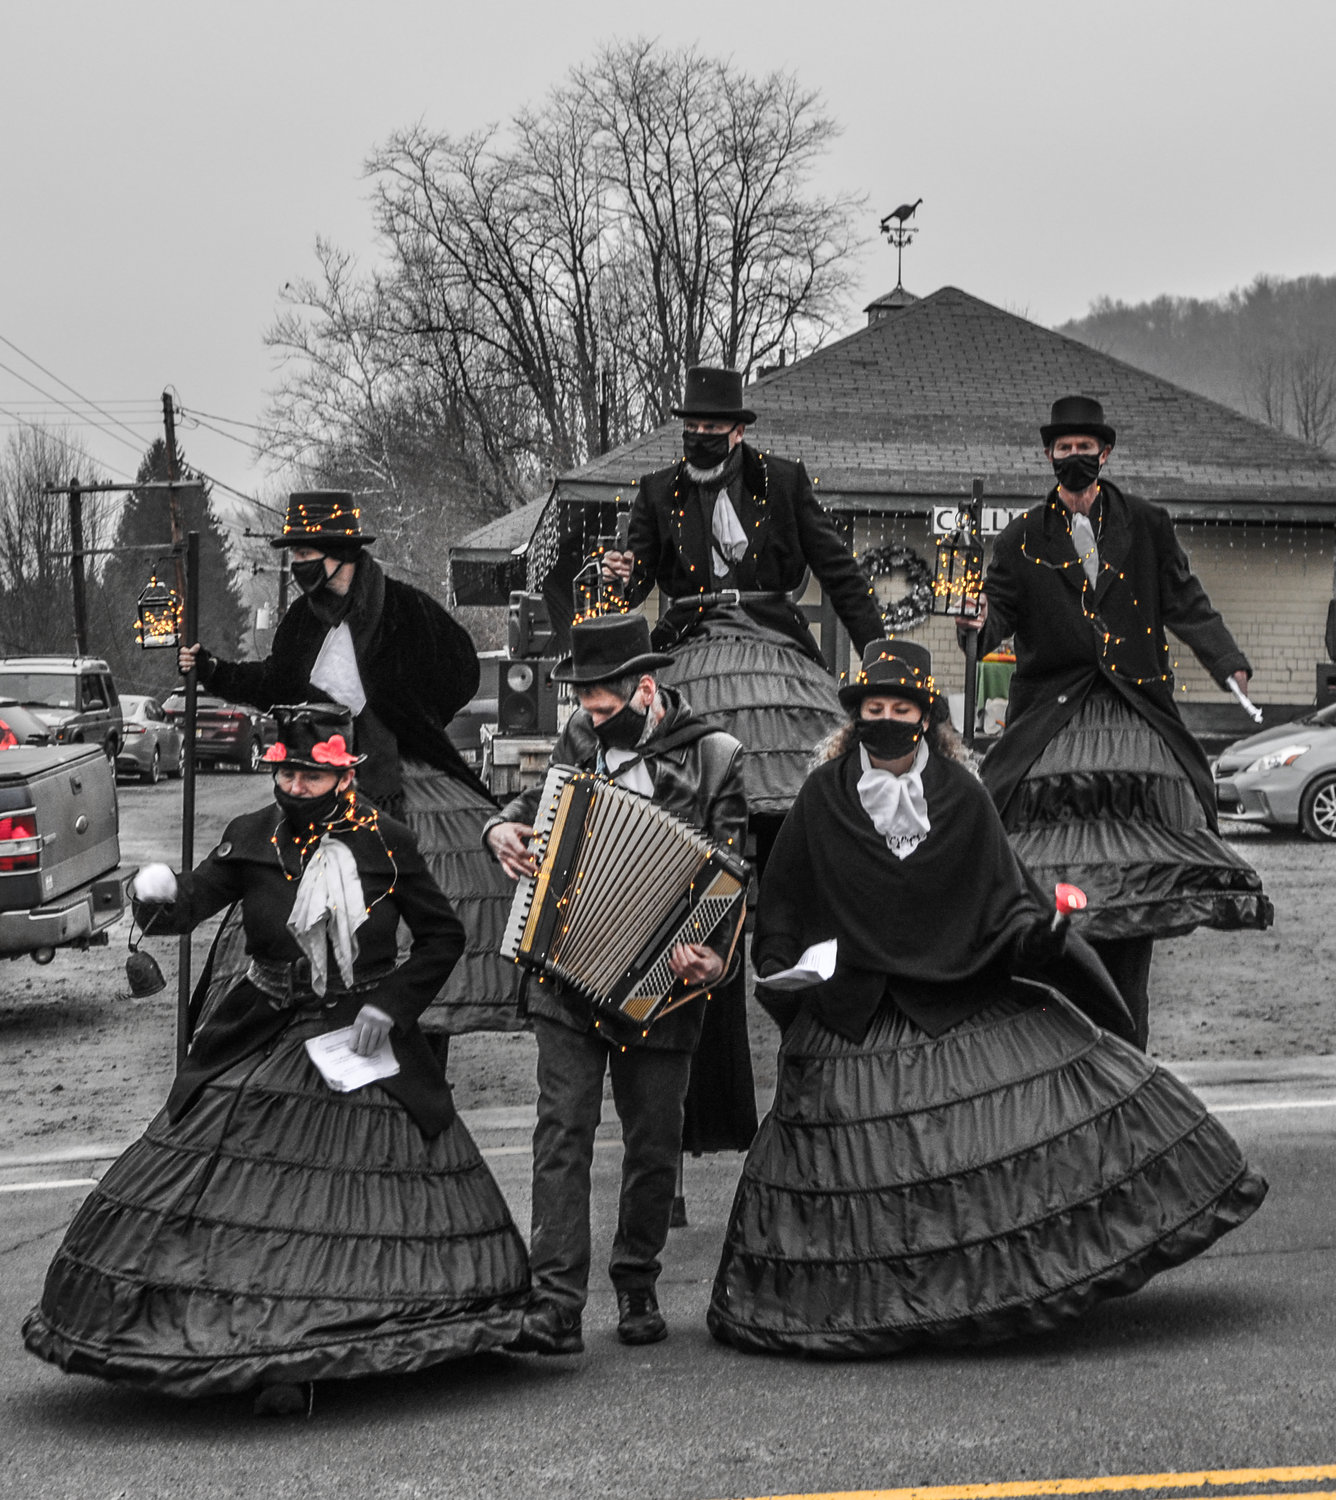 Did the Farm Arts Collective lift my spirits as they marched through town performing a funeral dirge? Not really, but they’re a staple at Dickens on the Delaware.